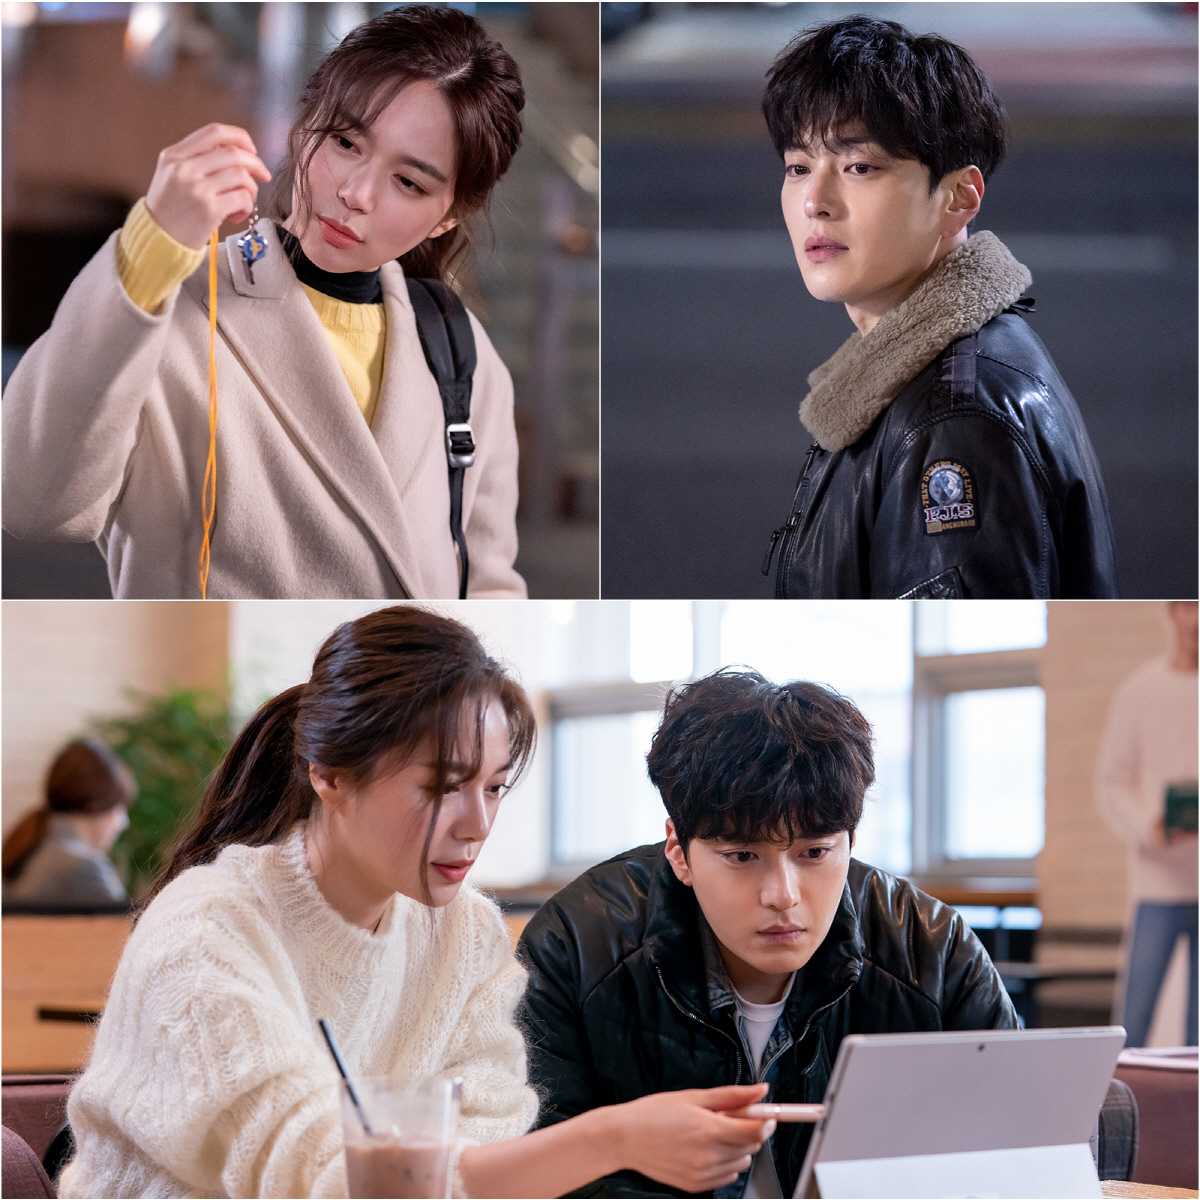 A new atmosphere was detected between The Good Detective Jang Seung-jo and Lee Elijah.The two people who were hit by the incident were caught sitting side by side and concentrating on something.At the JTBC Wall Street drama The Good Detective (playplayed by Choi Jin-won, directed by Cho Nam-guk, production blossom story, JTBC studio), Jang Seung-jo described Jean Elijah to Jang Seung-jo as a sick finger that is concerned.But so far, they had growled just when they met, so Kang Do-chang (Son Hyun-joo) was busy to notice.Oh Ji-hyeok saw her coverage as a desire to get a special, and on the contrary, Jin Seo-kyung thought that the police were looking at the case in favor of the police.The same was true in the last three times in front of the death of Kŏn-ho Pak (Lee Hyun-wook), who claimed the innocence of Lee Dae-cheol (Jo Jae-yoon).Jin Seo-kyung knew that Kŏn-ho Pak was trying to kill Lee Dae-chul when he was a prison officer and that Kŏn-ho Pak met someone related to the case.However, he told me late on what he learned when he was covering the pinjack of Oh Ji-hyeok, If anyone meets and stabs him here and there, and Kŏn-ho Pak was attacked by someone and died.So Oh Ji-hyeok bombarded the fact that If we had told Kŏn-ho Pak beforehand, we would have followed Kŏn-ho Pak and Jin Seo-kyung said, Do you want to tell me that I was dead?, and another dizzying spark like this.While attention has been focused on the direction of the relationship between Oh Ji-hyuk and Jin Seo-kyung, who have been curious about whether the day will get better, the still cut released by The Good Detective side before the broadcast today (on the 20th) attracts attention.The sparkling eyes sat side by side and focused on something together, and there was a strange atmosphere of Jin Seo Kyung watching the whistle with the police mark and Oh Ji Hyuk looking at her.Above all, viewers reactions such as It is the scene of the year and Today from 1 day are hot in Oh Ji-hyuk, who rescued Jin Seo-kyung, who was kidnapped in the last four times, in the middle of the road.Expectations add to their mood, Reversal story.The Good Detective 5th, today (20th) Monday night at 9:30 JTBC broadcast.